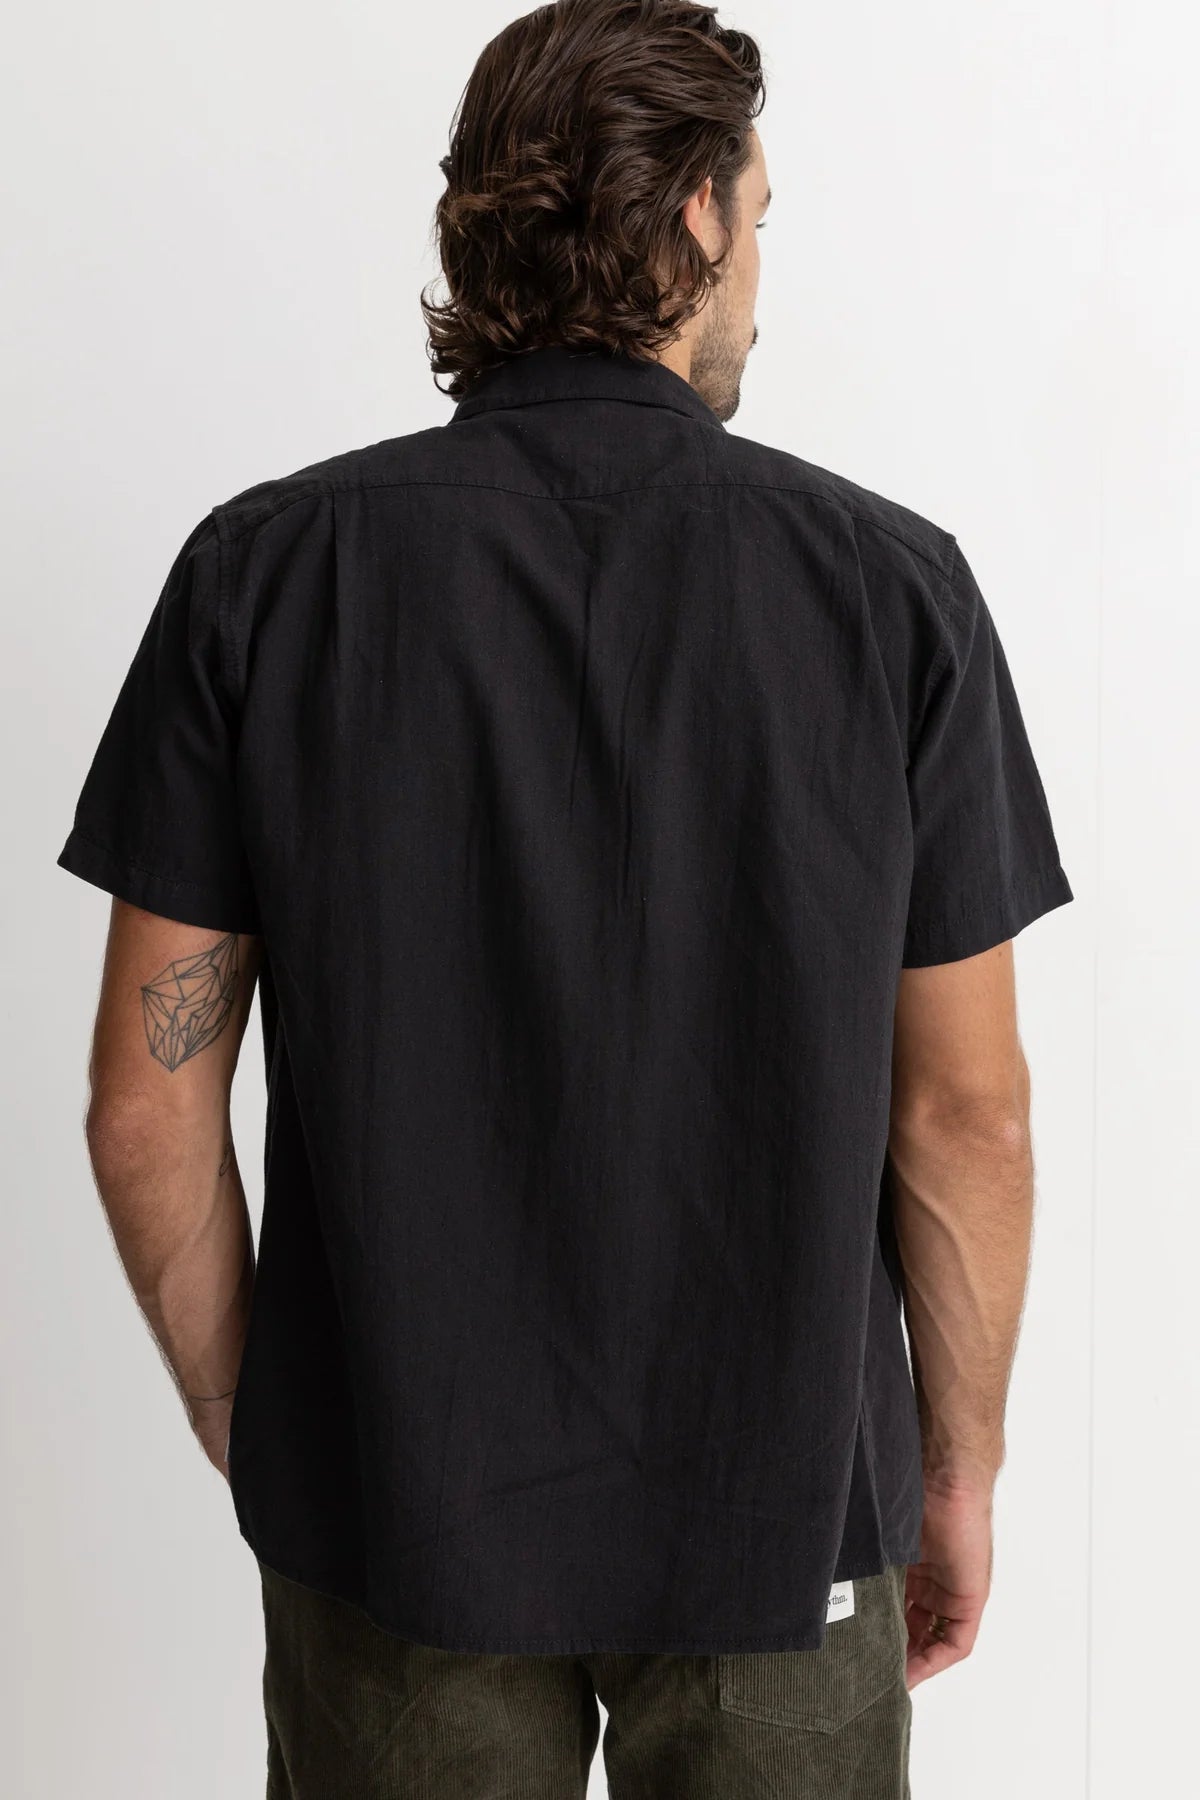 Back view of the Classic Lienen Short Sleeve shirt in black by Rhythm